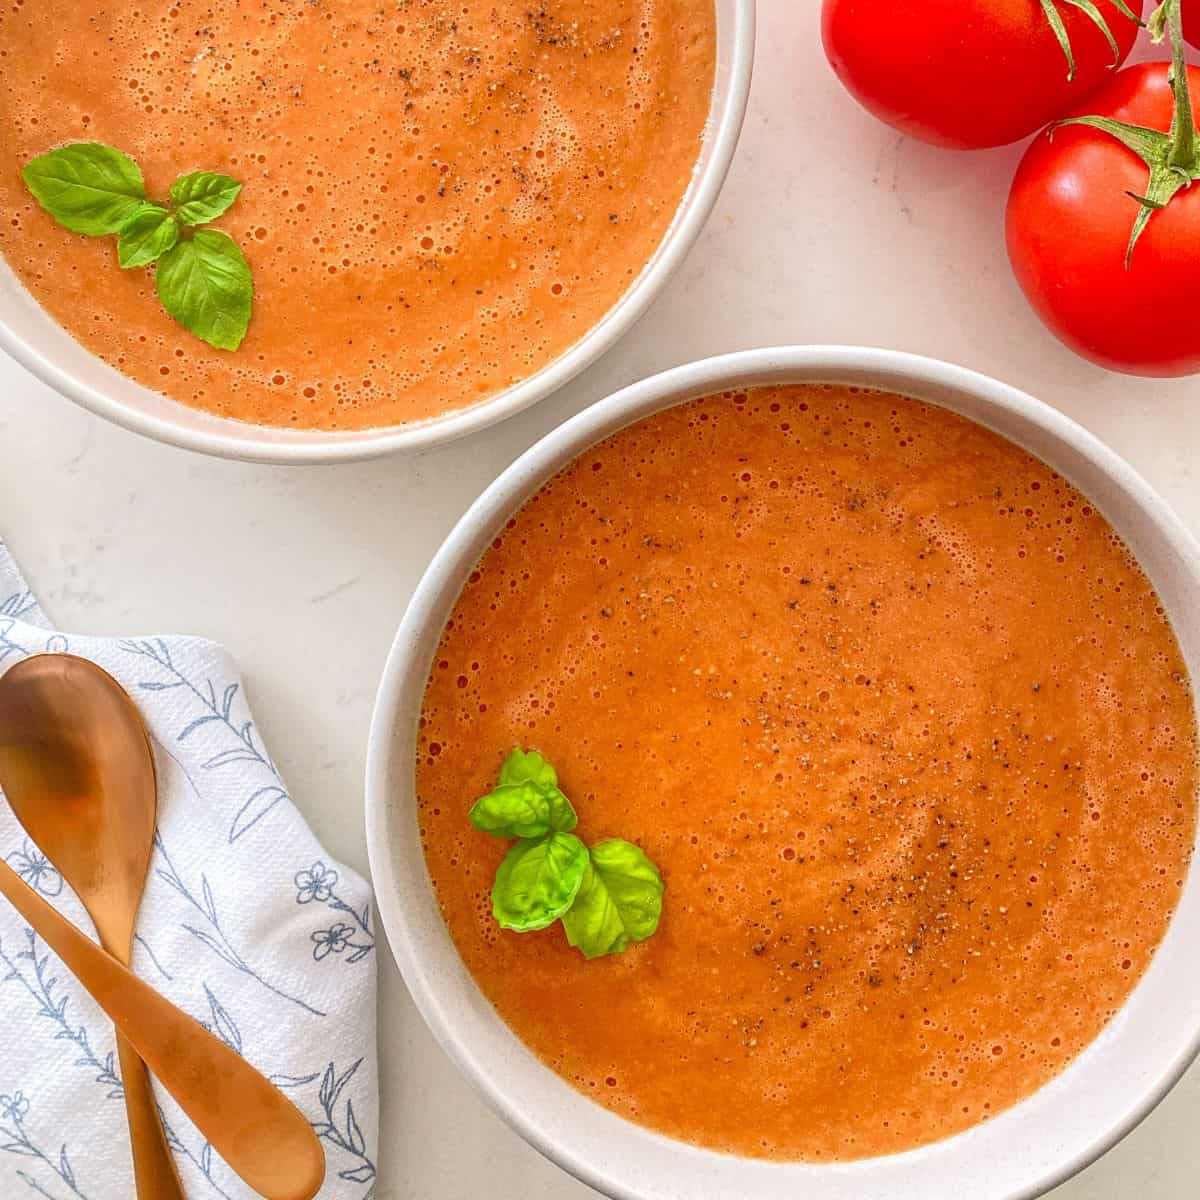 https://thishealthykitchen.com/wp-content/uploads/2023/06/Tomato-miso-soup-FEAT-IMG-1.jpg